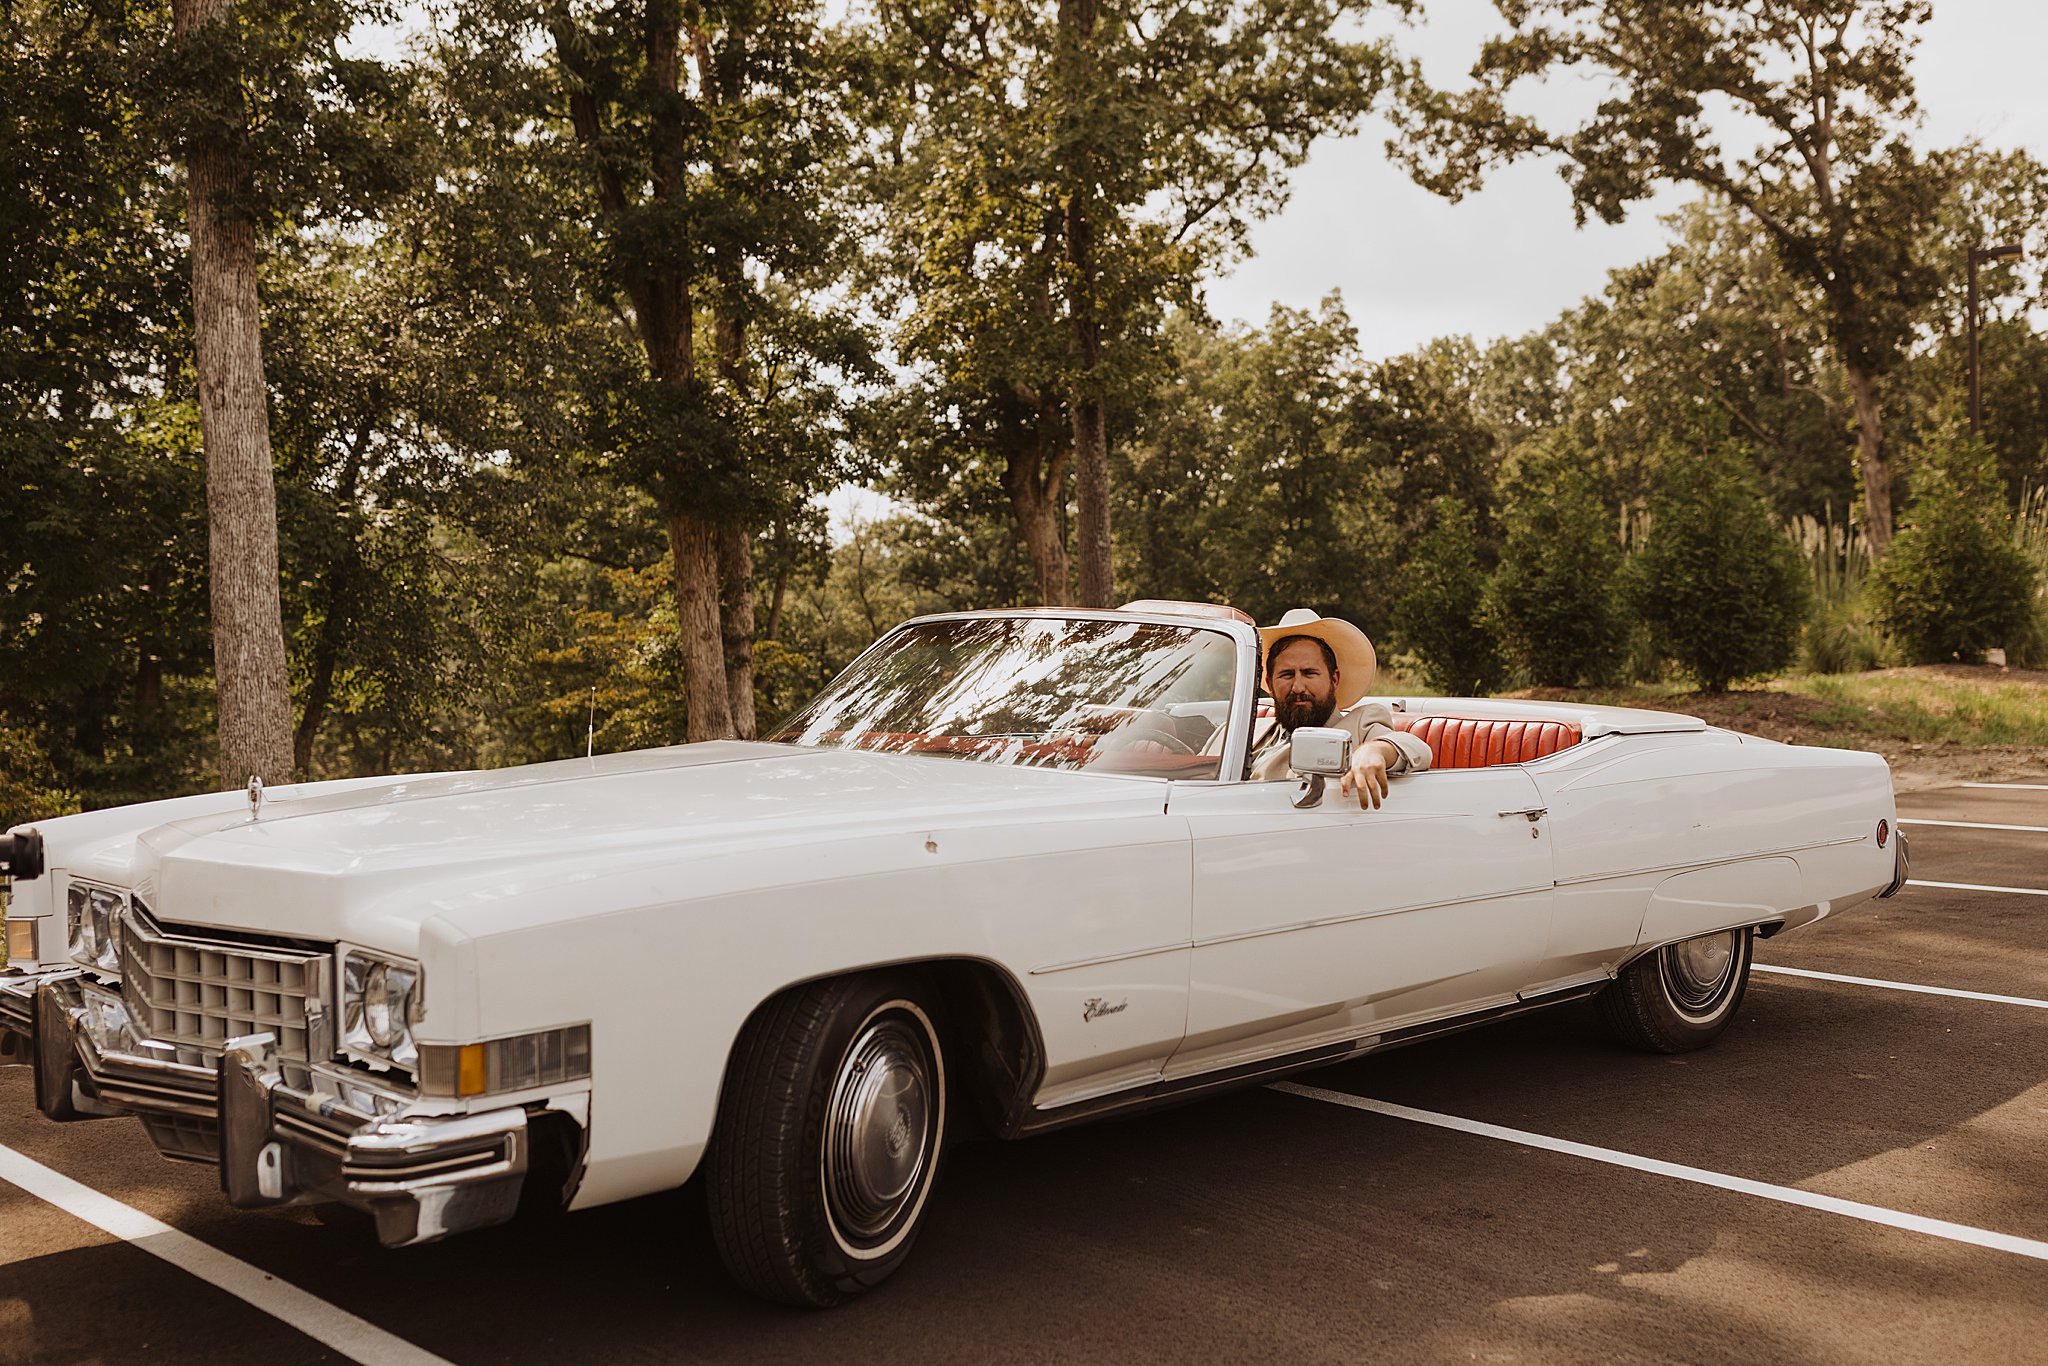 Groom driving a Vintage Cadillac on Wedding Day